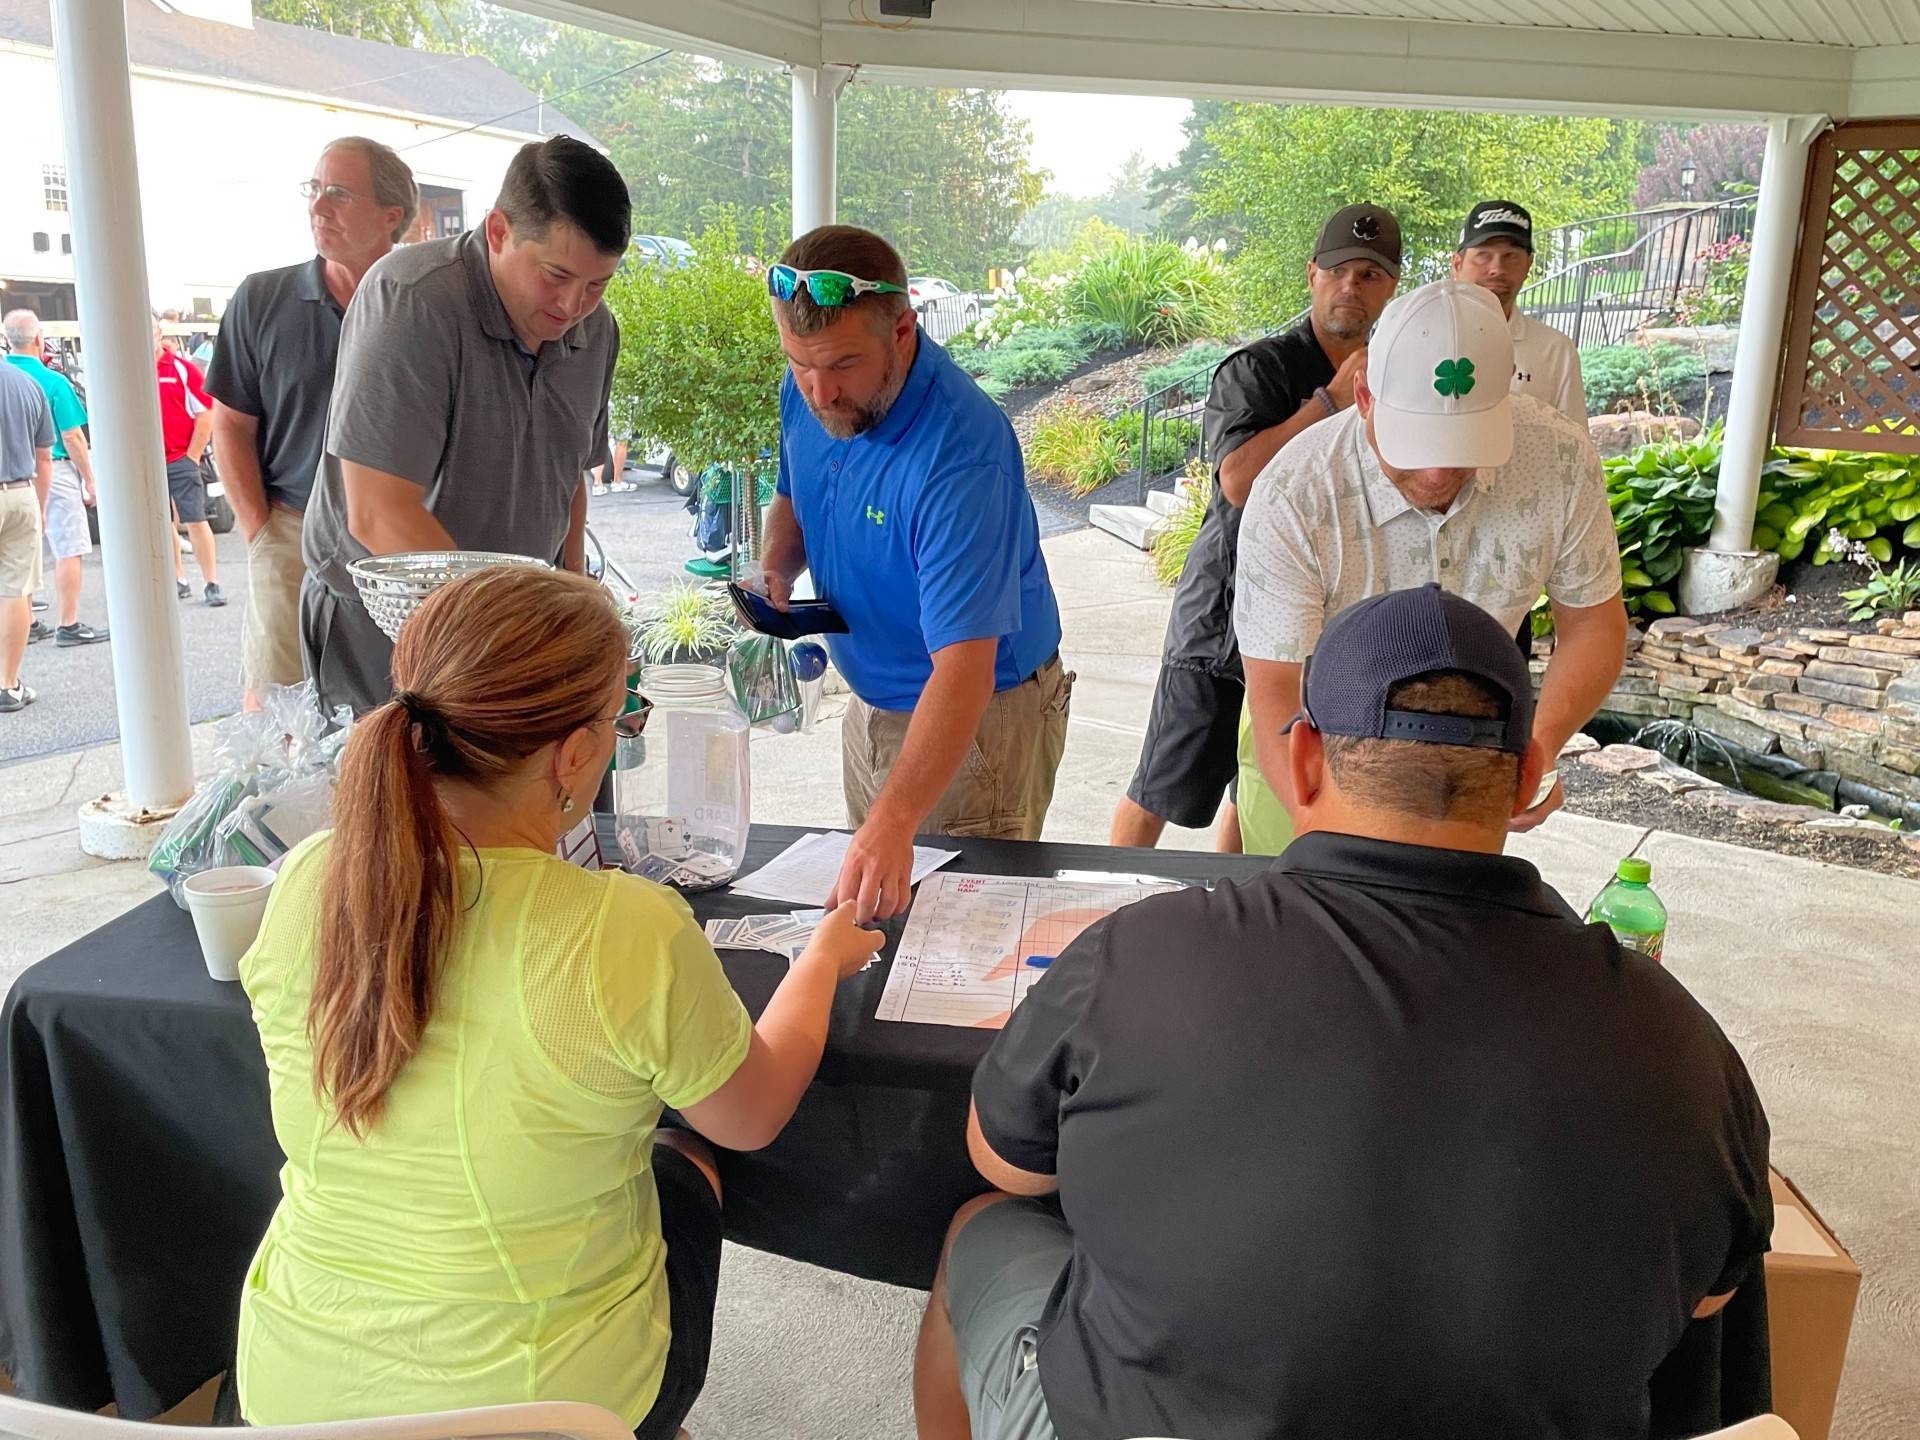 2021 Golf Outing registration table